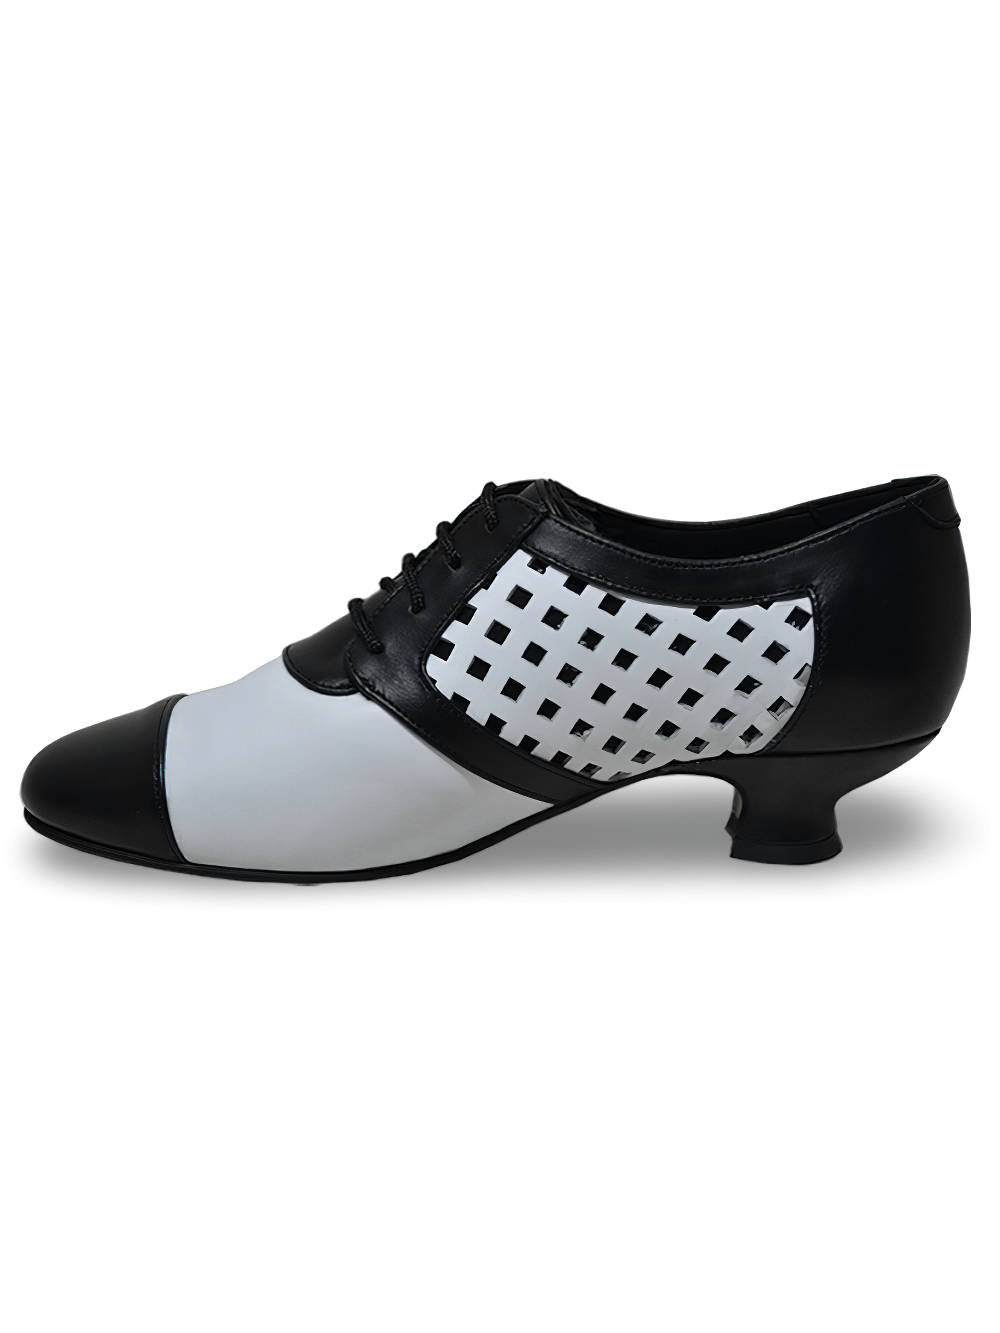 White and Black Grained Leather Lace-Up Shoes